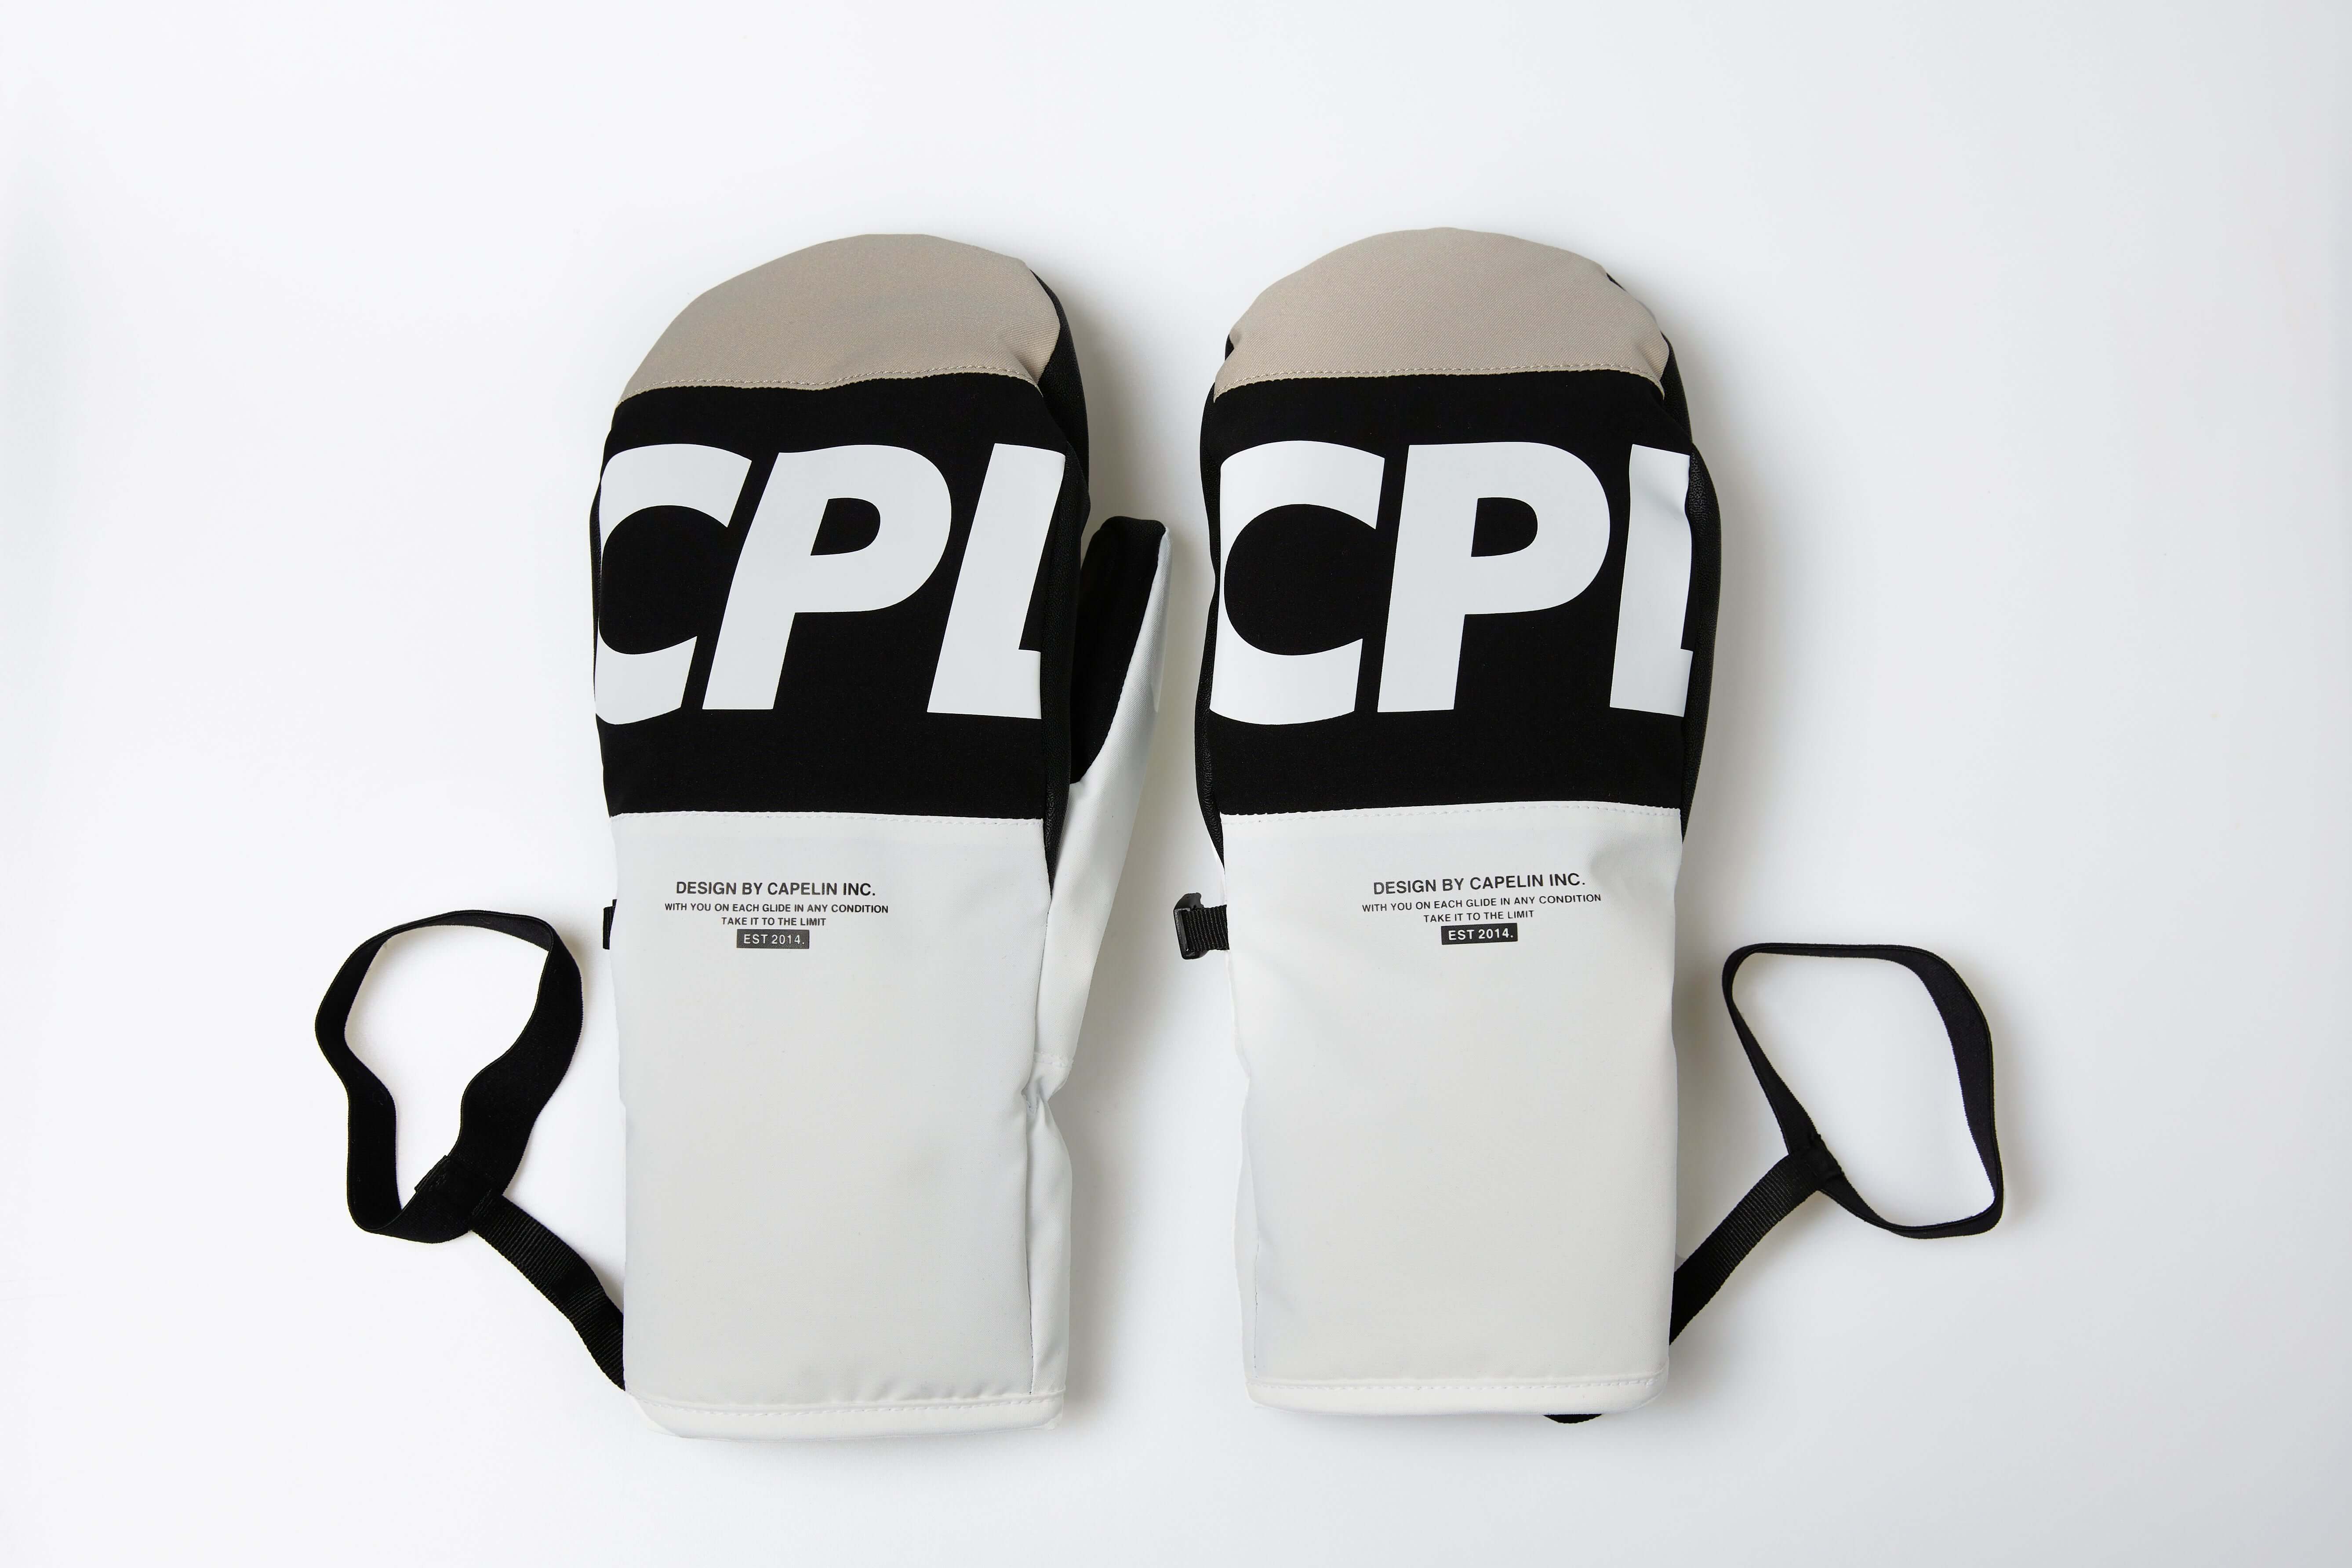 CAPELIN CREW | Winter Accessories for Snowboarders: Gloves, Face Covers, and More